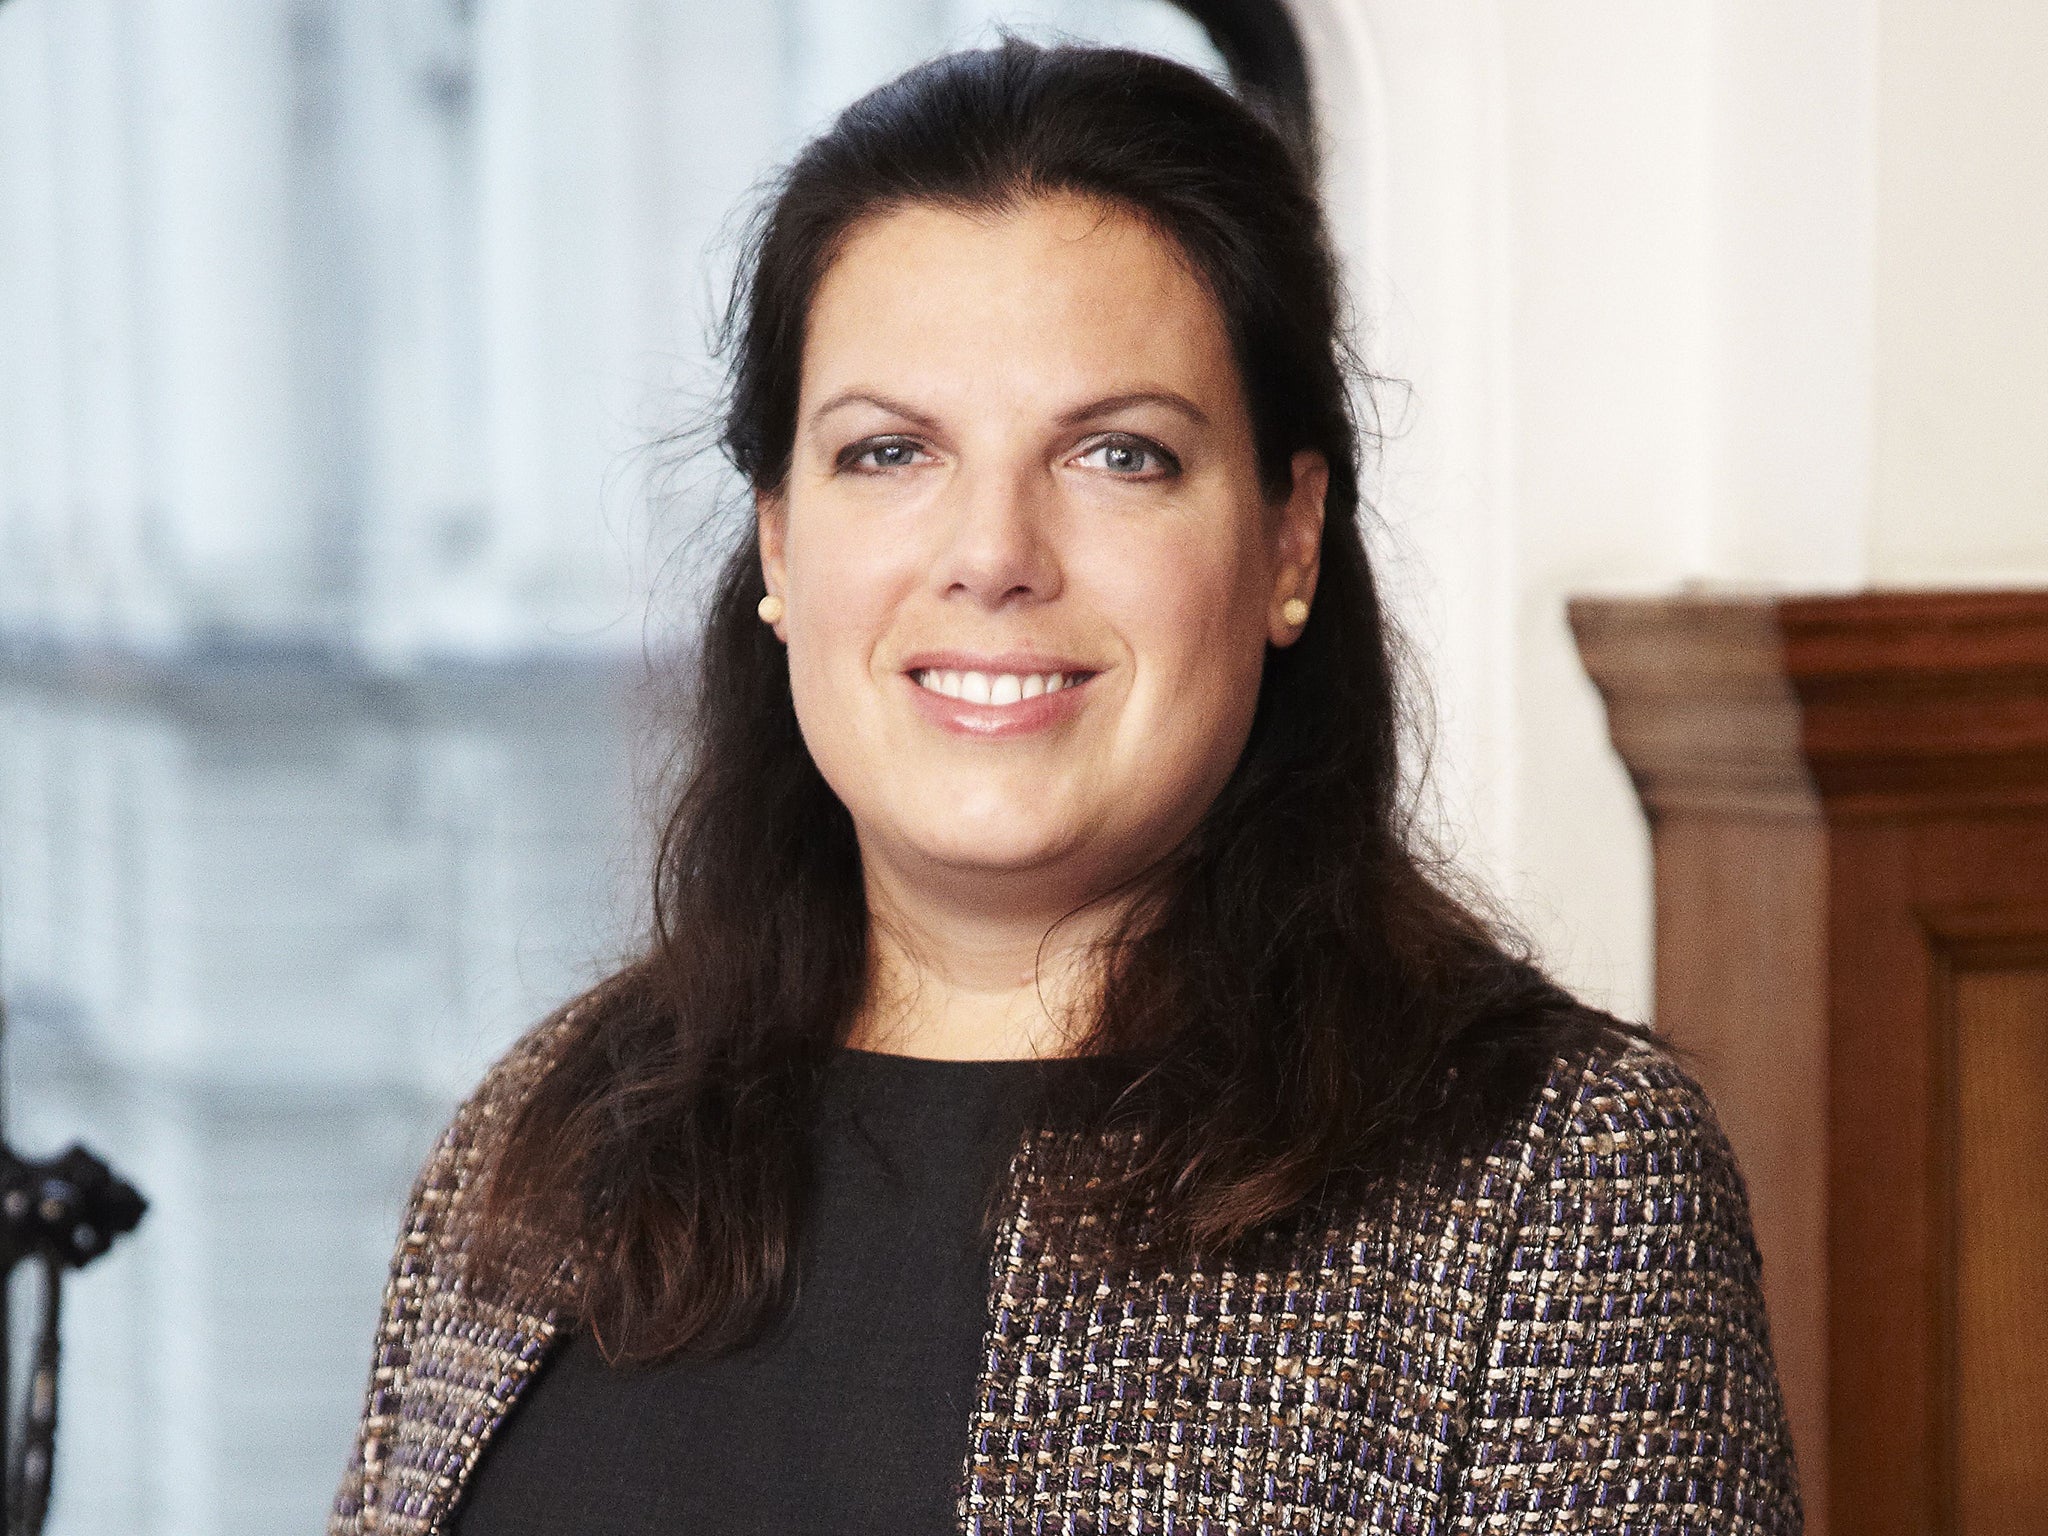 Caroline Nokes blocked at least two British citizens who turned to her for help after the Home Office failed to assist